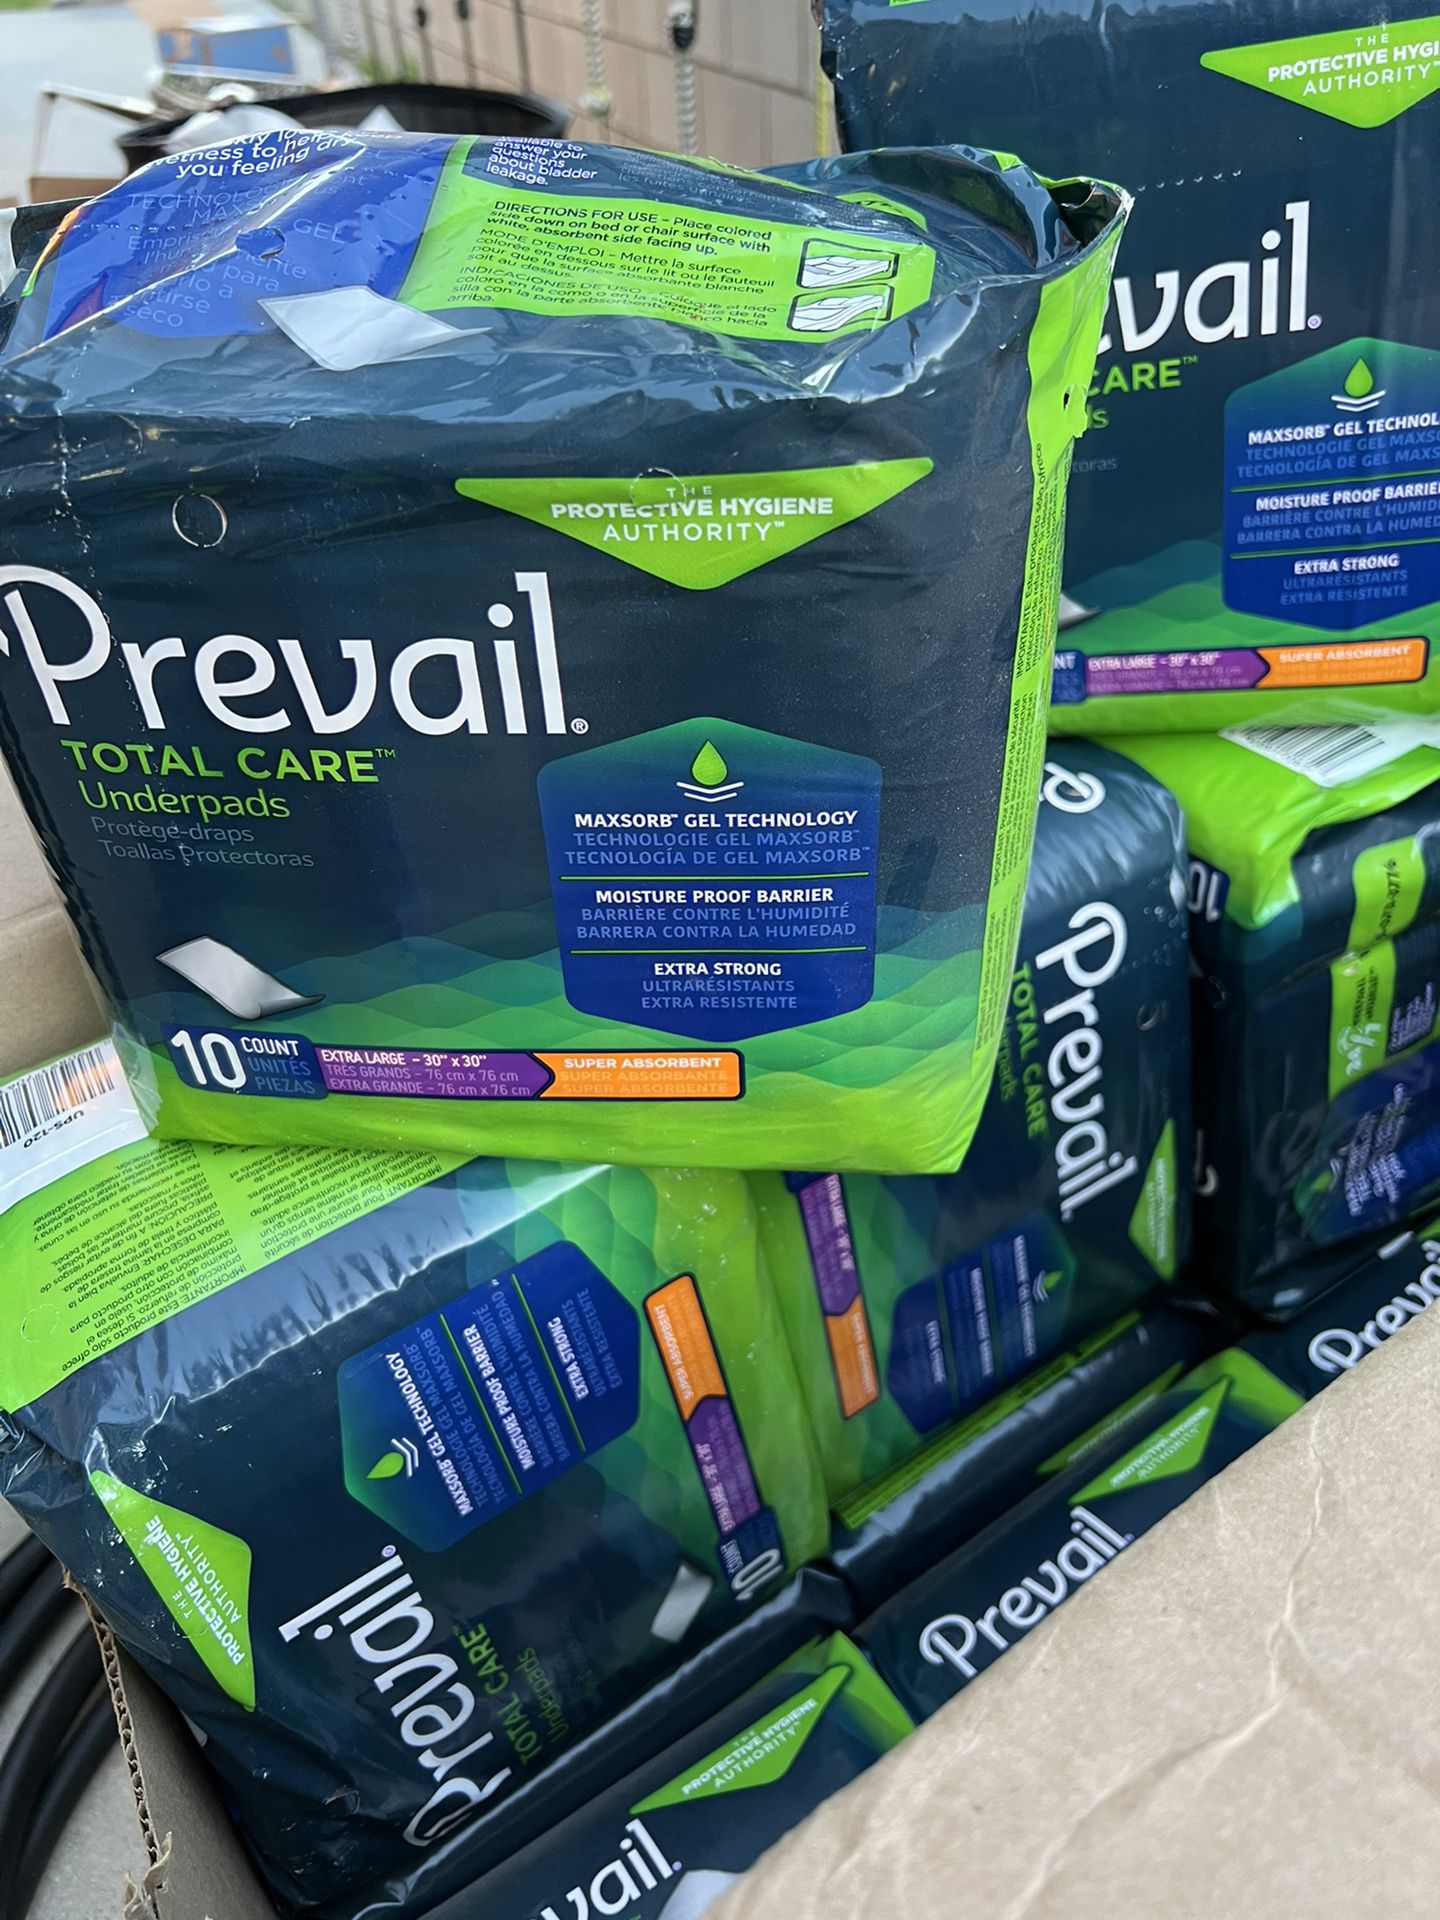 Previal Total Care Underpads 14 Bags 5 Each 